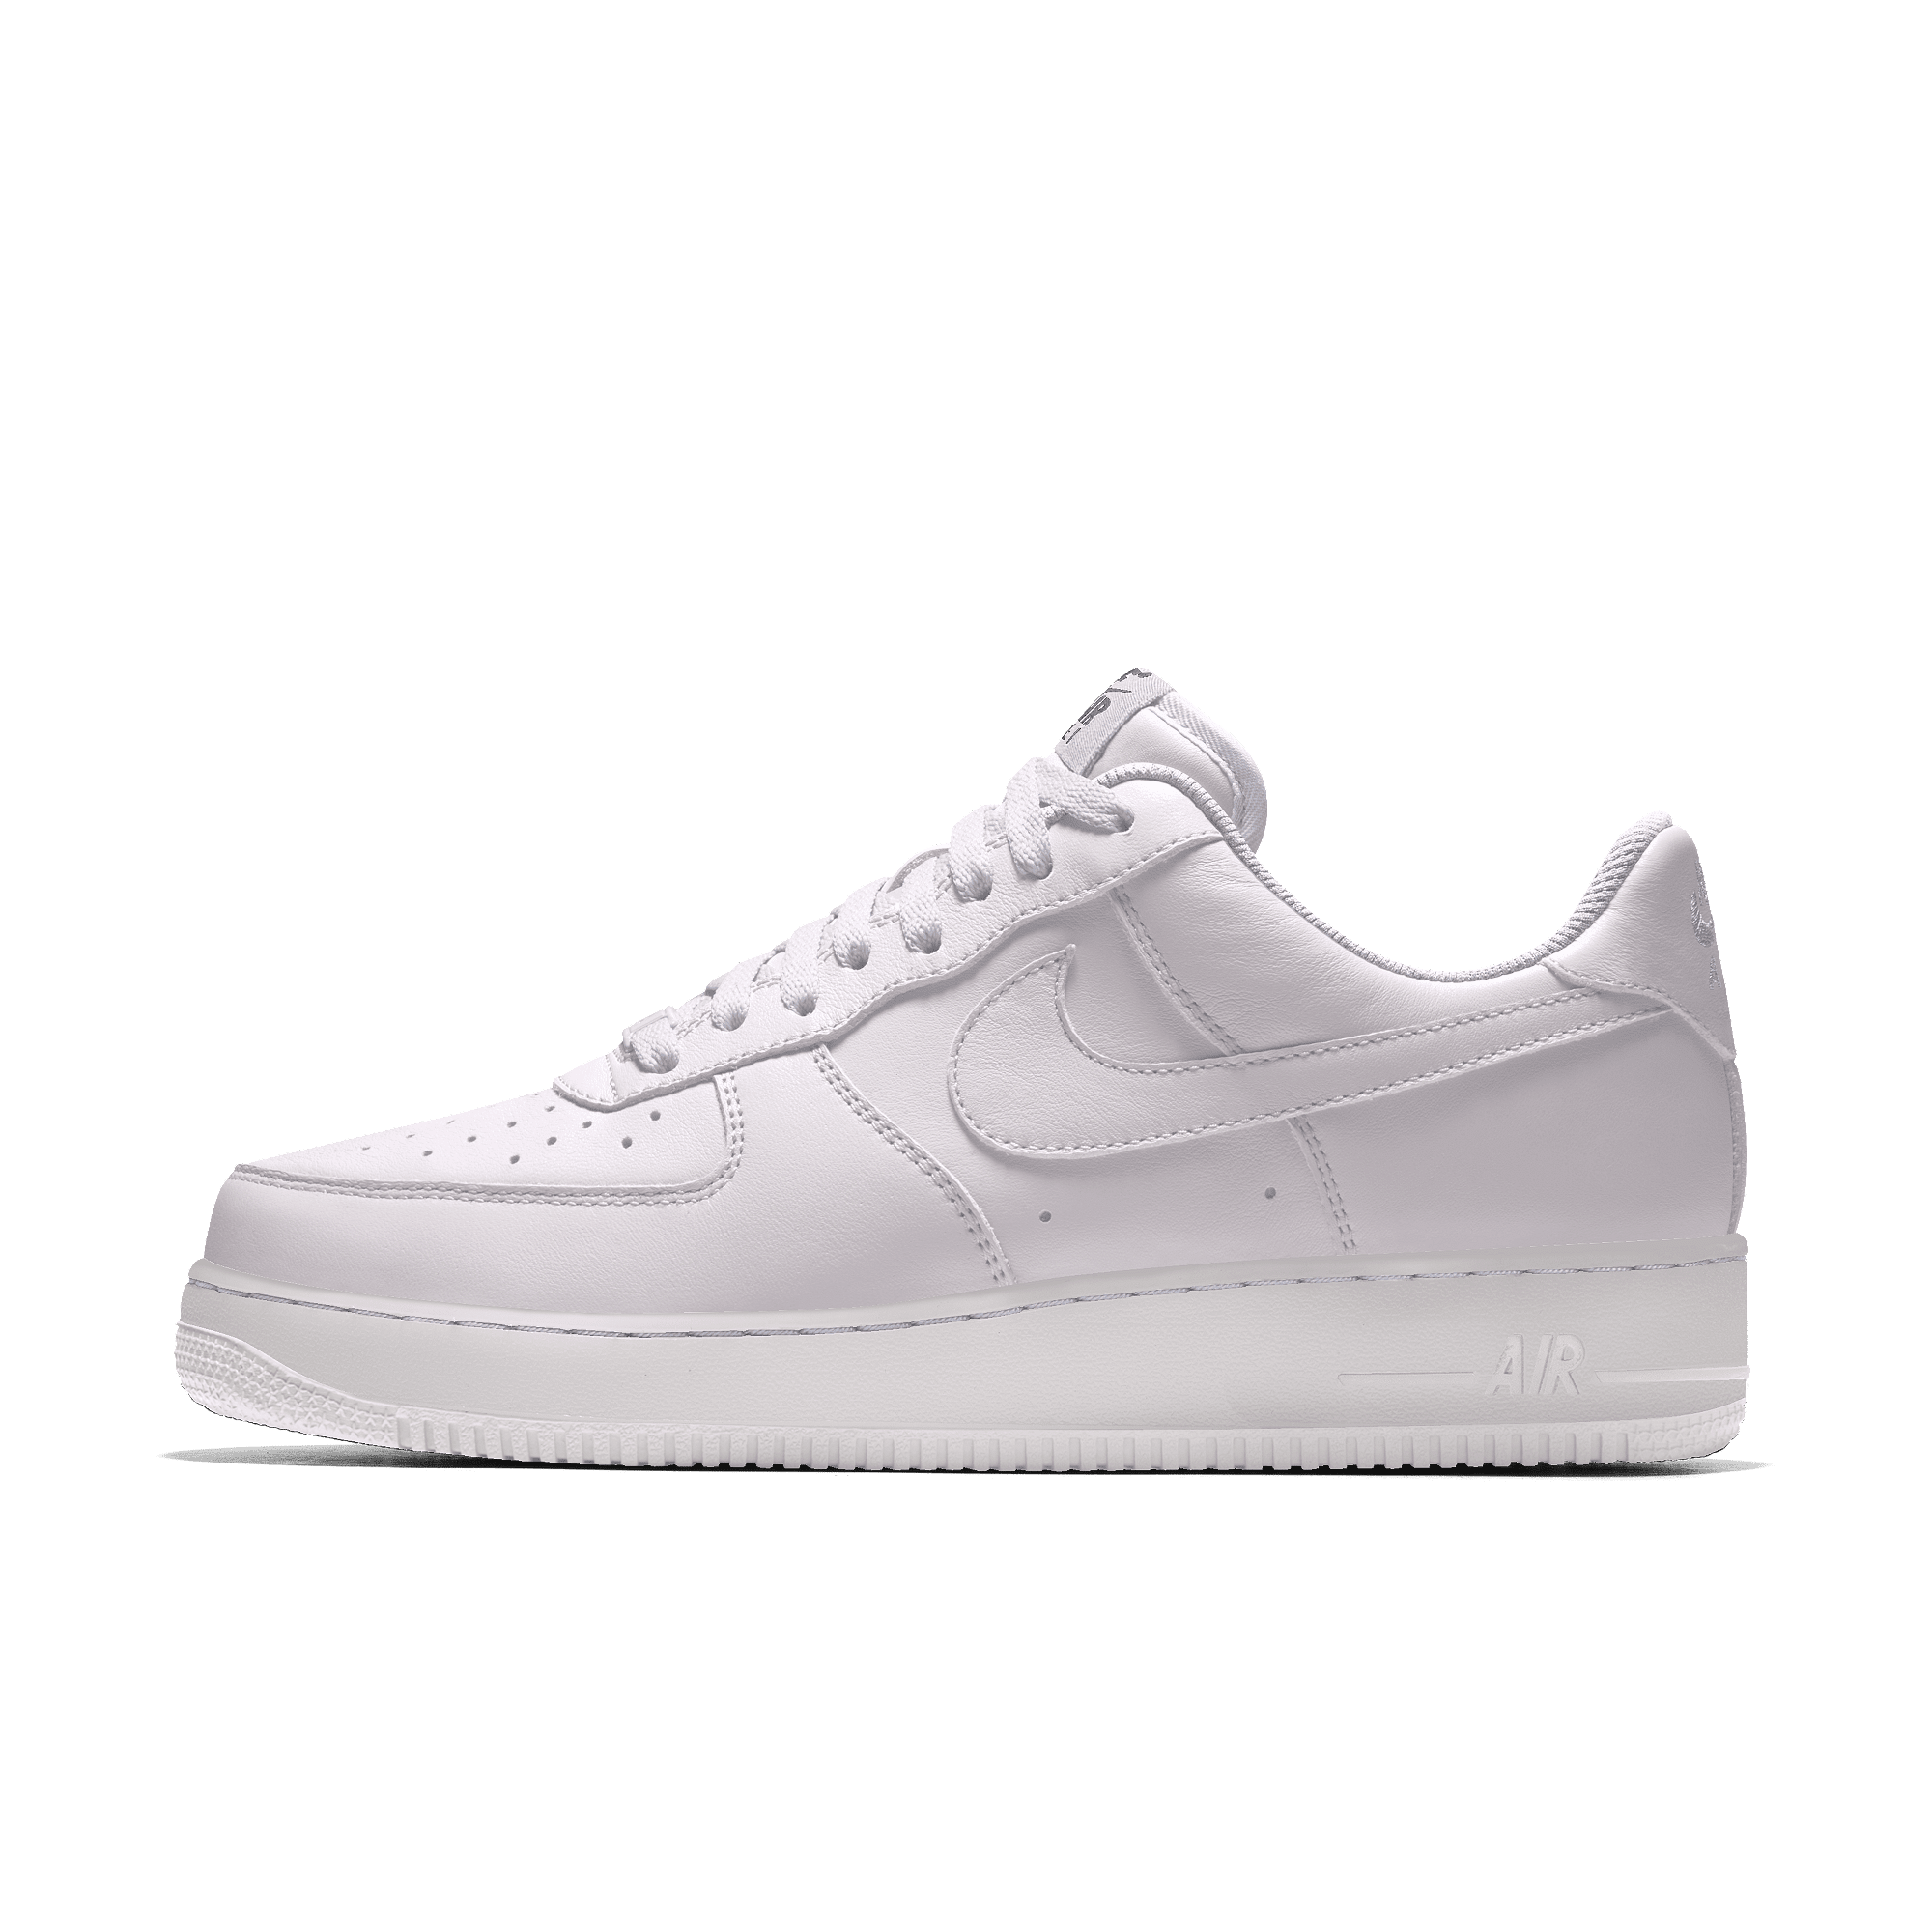 Scarpa personalizzabile Nike Air Force 1 Low By You - Donna - Bianco